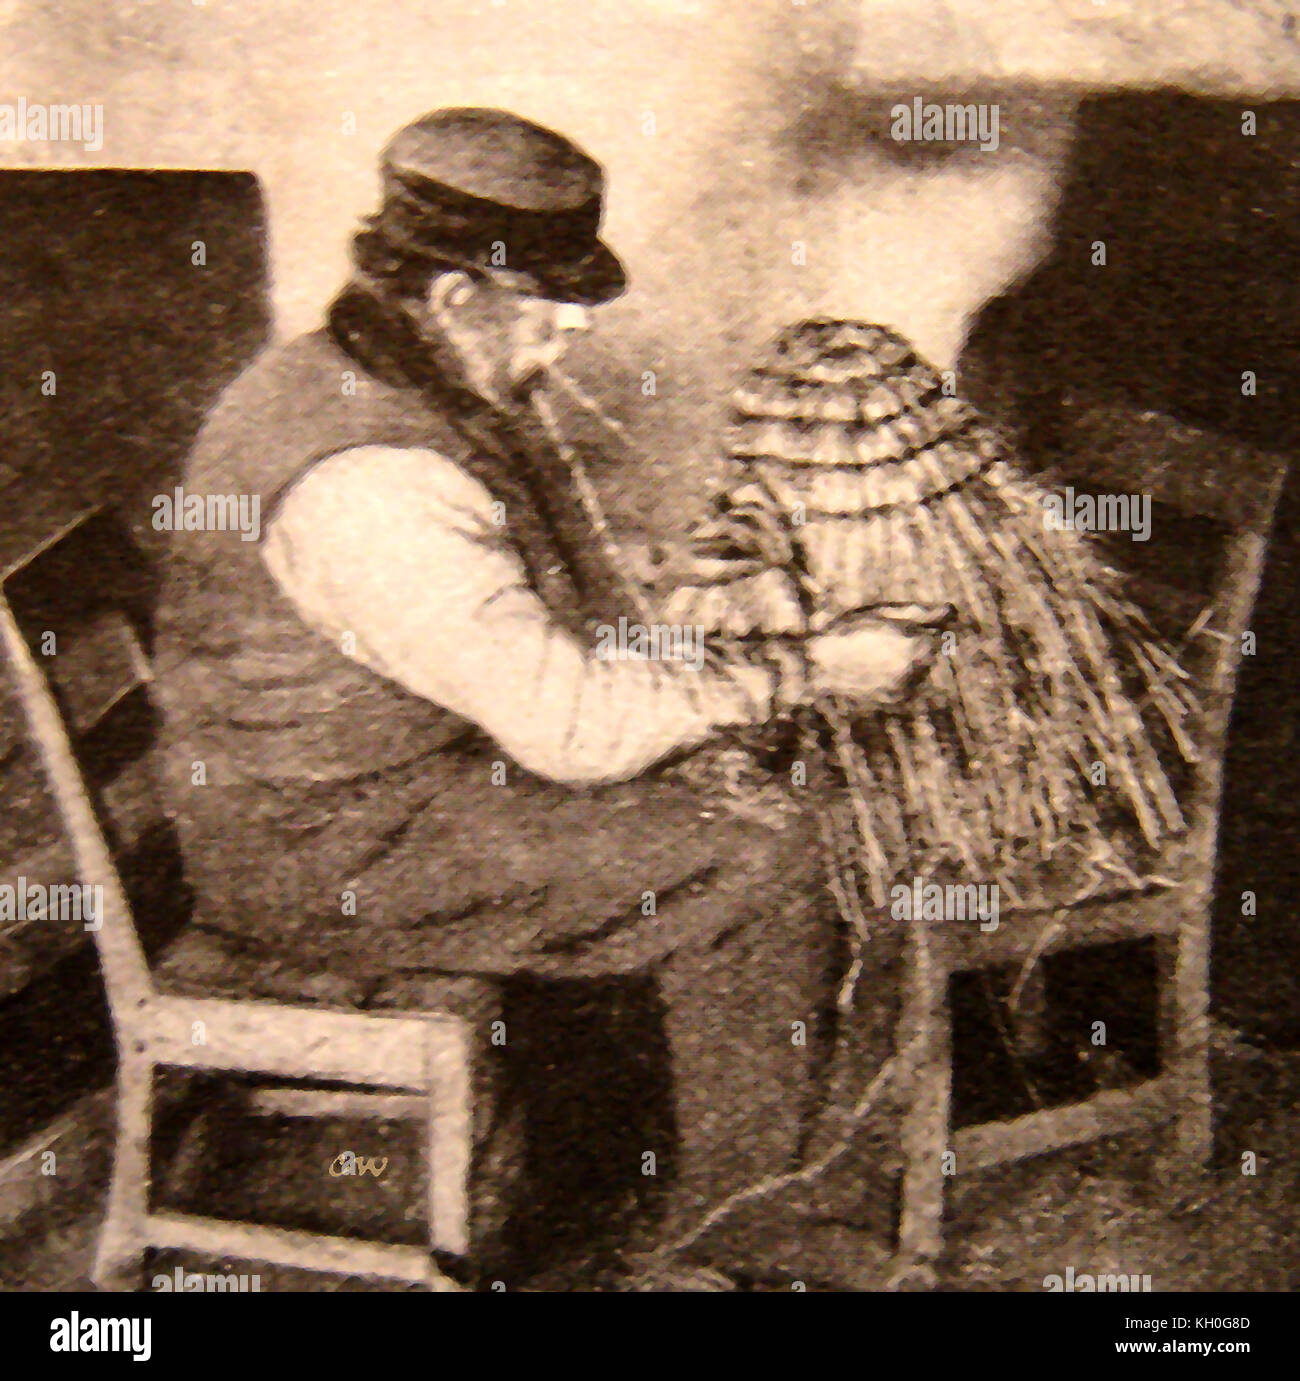 Straw Hat - A man in France with his lap dogs wears the typical straw hat popular in the early 1900's Stock Photo